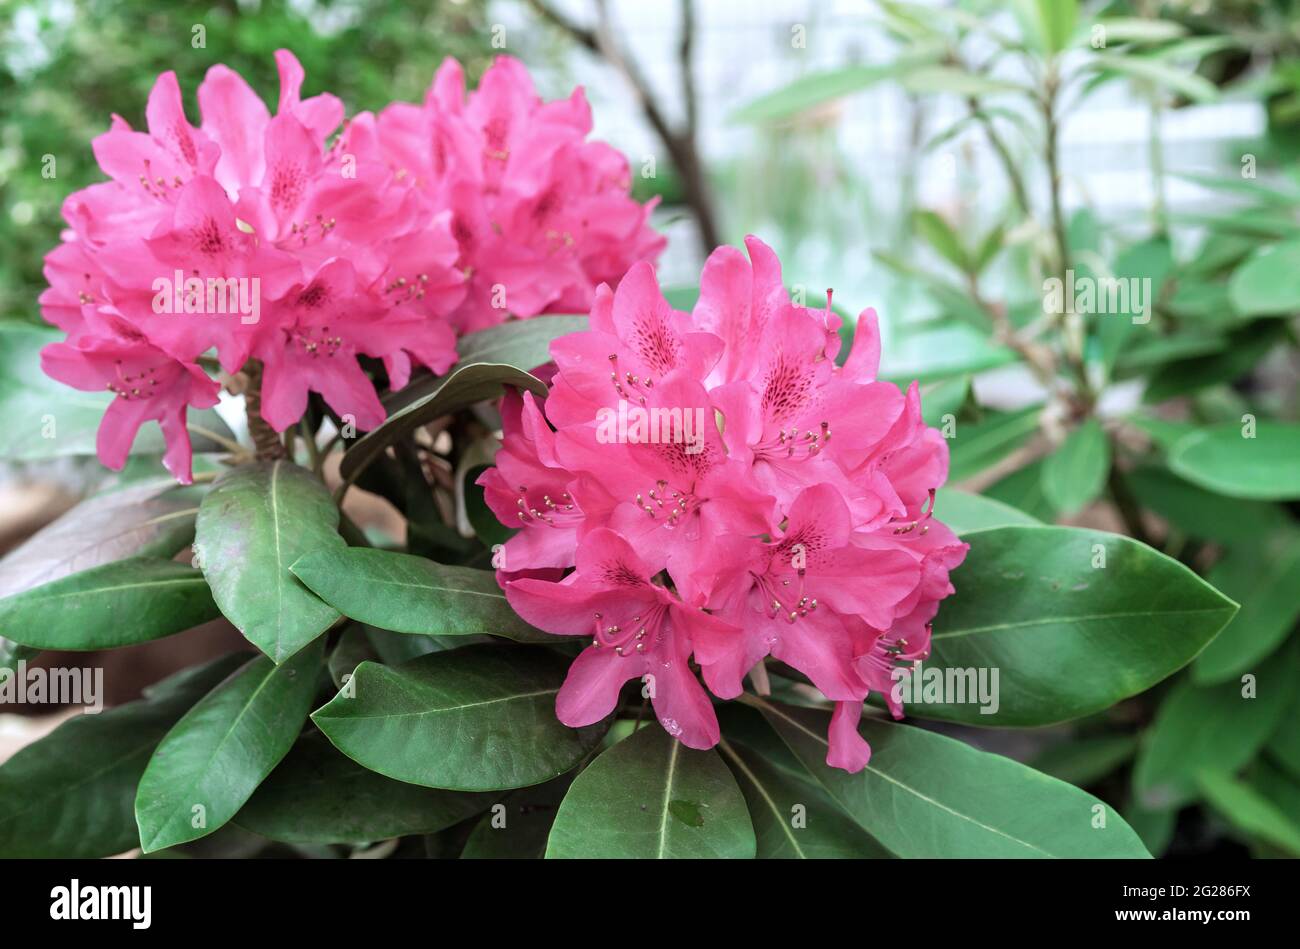 Pacific pink rhododendron (Rhododendron macrophyllum) is a large-leaved species of rhododendron native to the Pacific coast of North America. Stock Photo